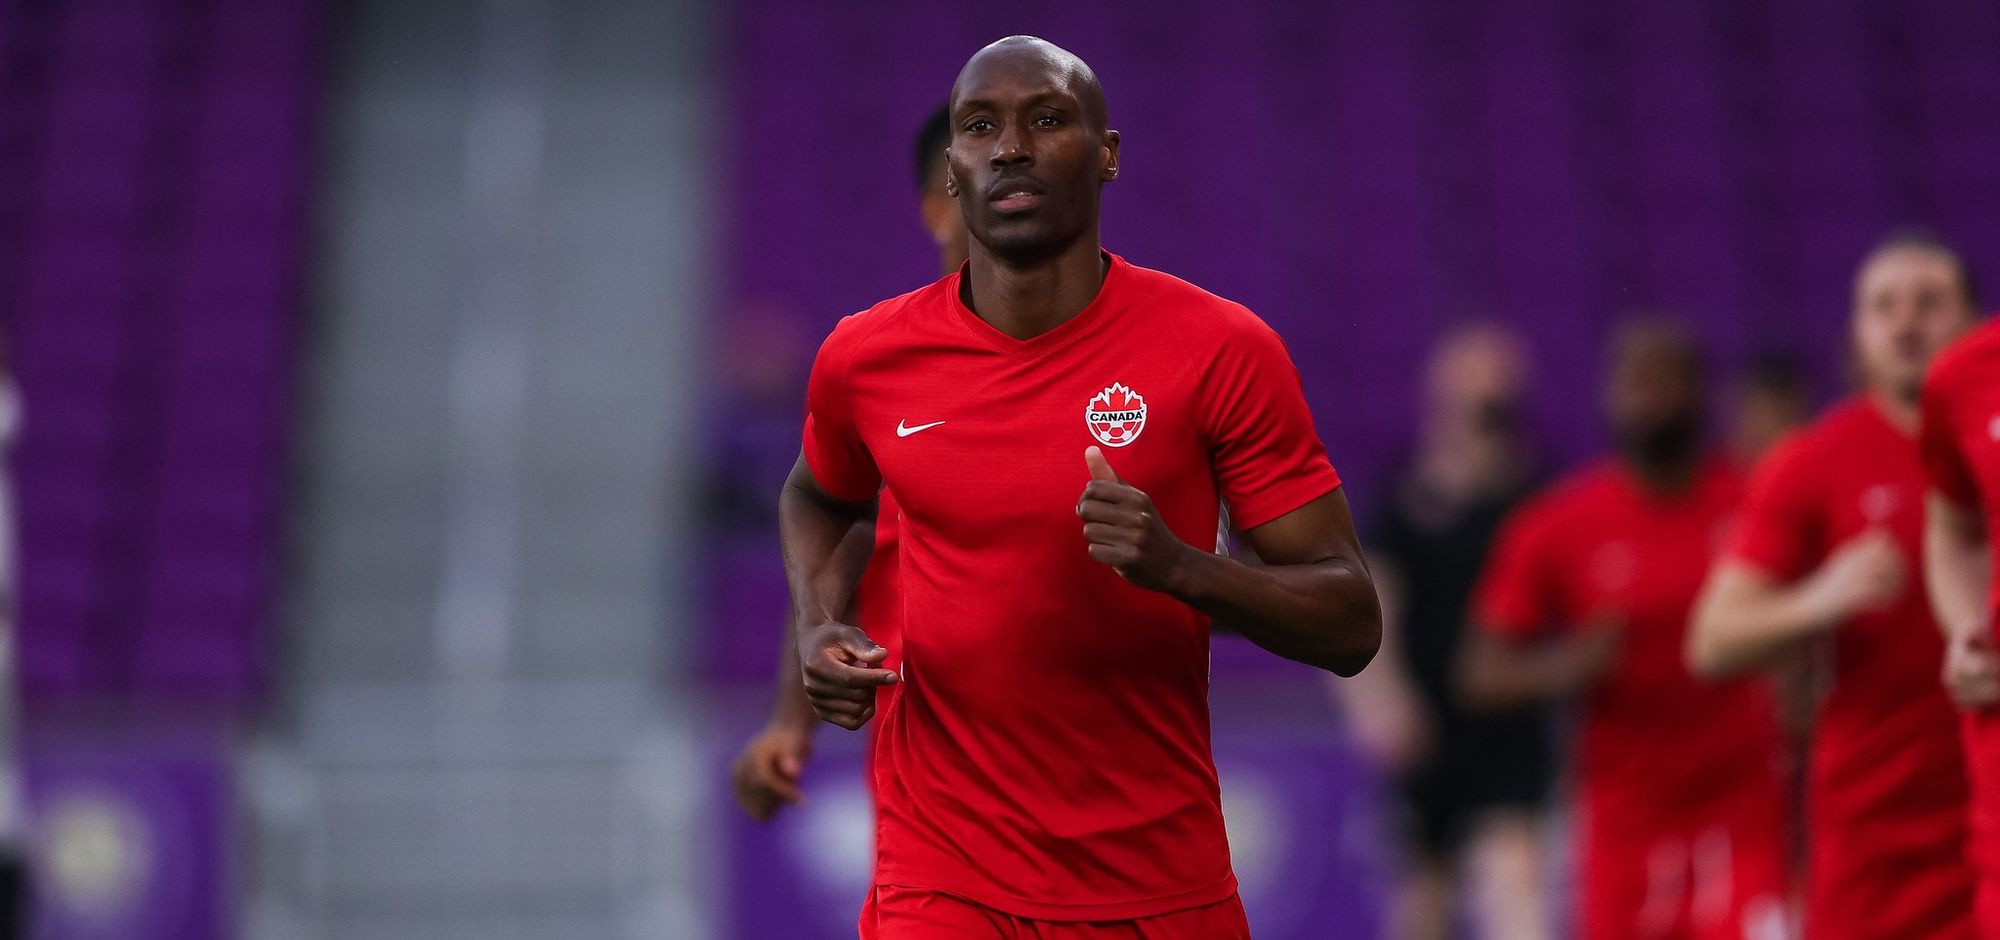 Canada's Atiba Hutchinson on the verge of national team history